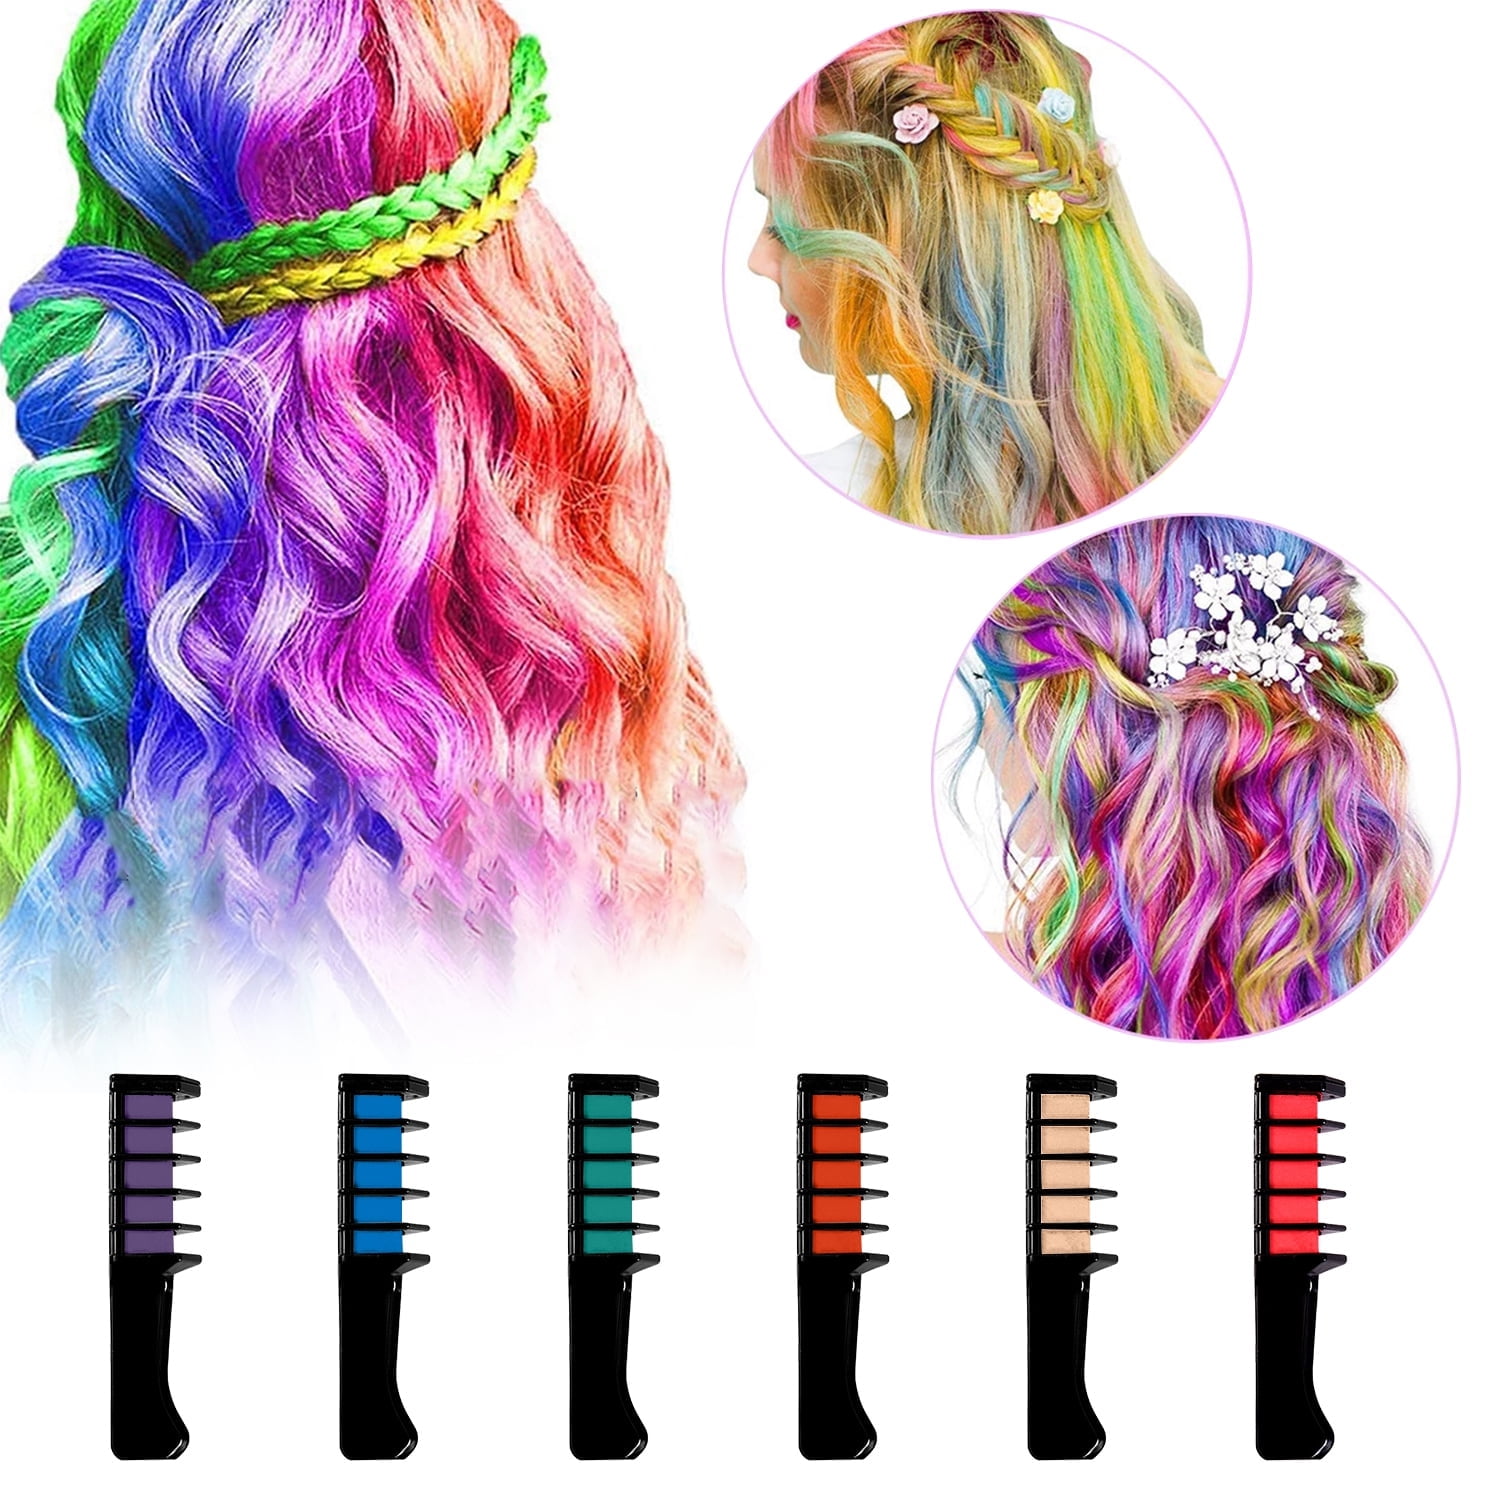 Inadays Hair Chalk Comb Temporary Bright Hair Color Dye for Girls Kids, Washable Hair Chalk for Kids-girls Toys Birthday Halloween Christmas Gifts for